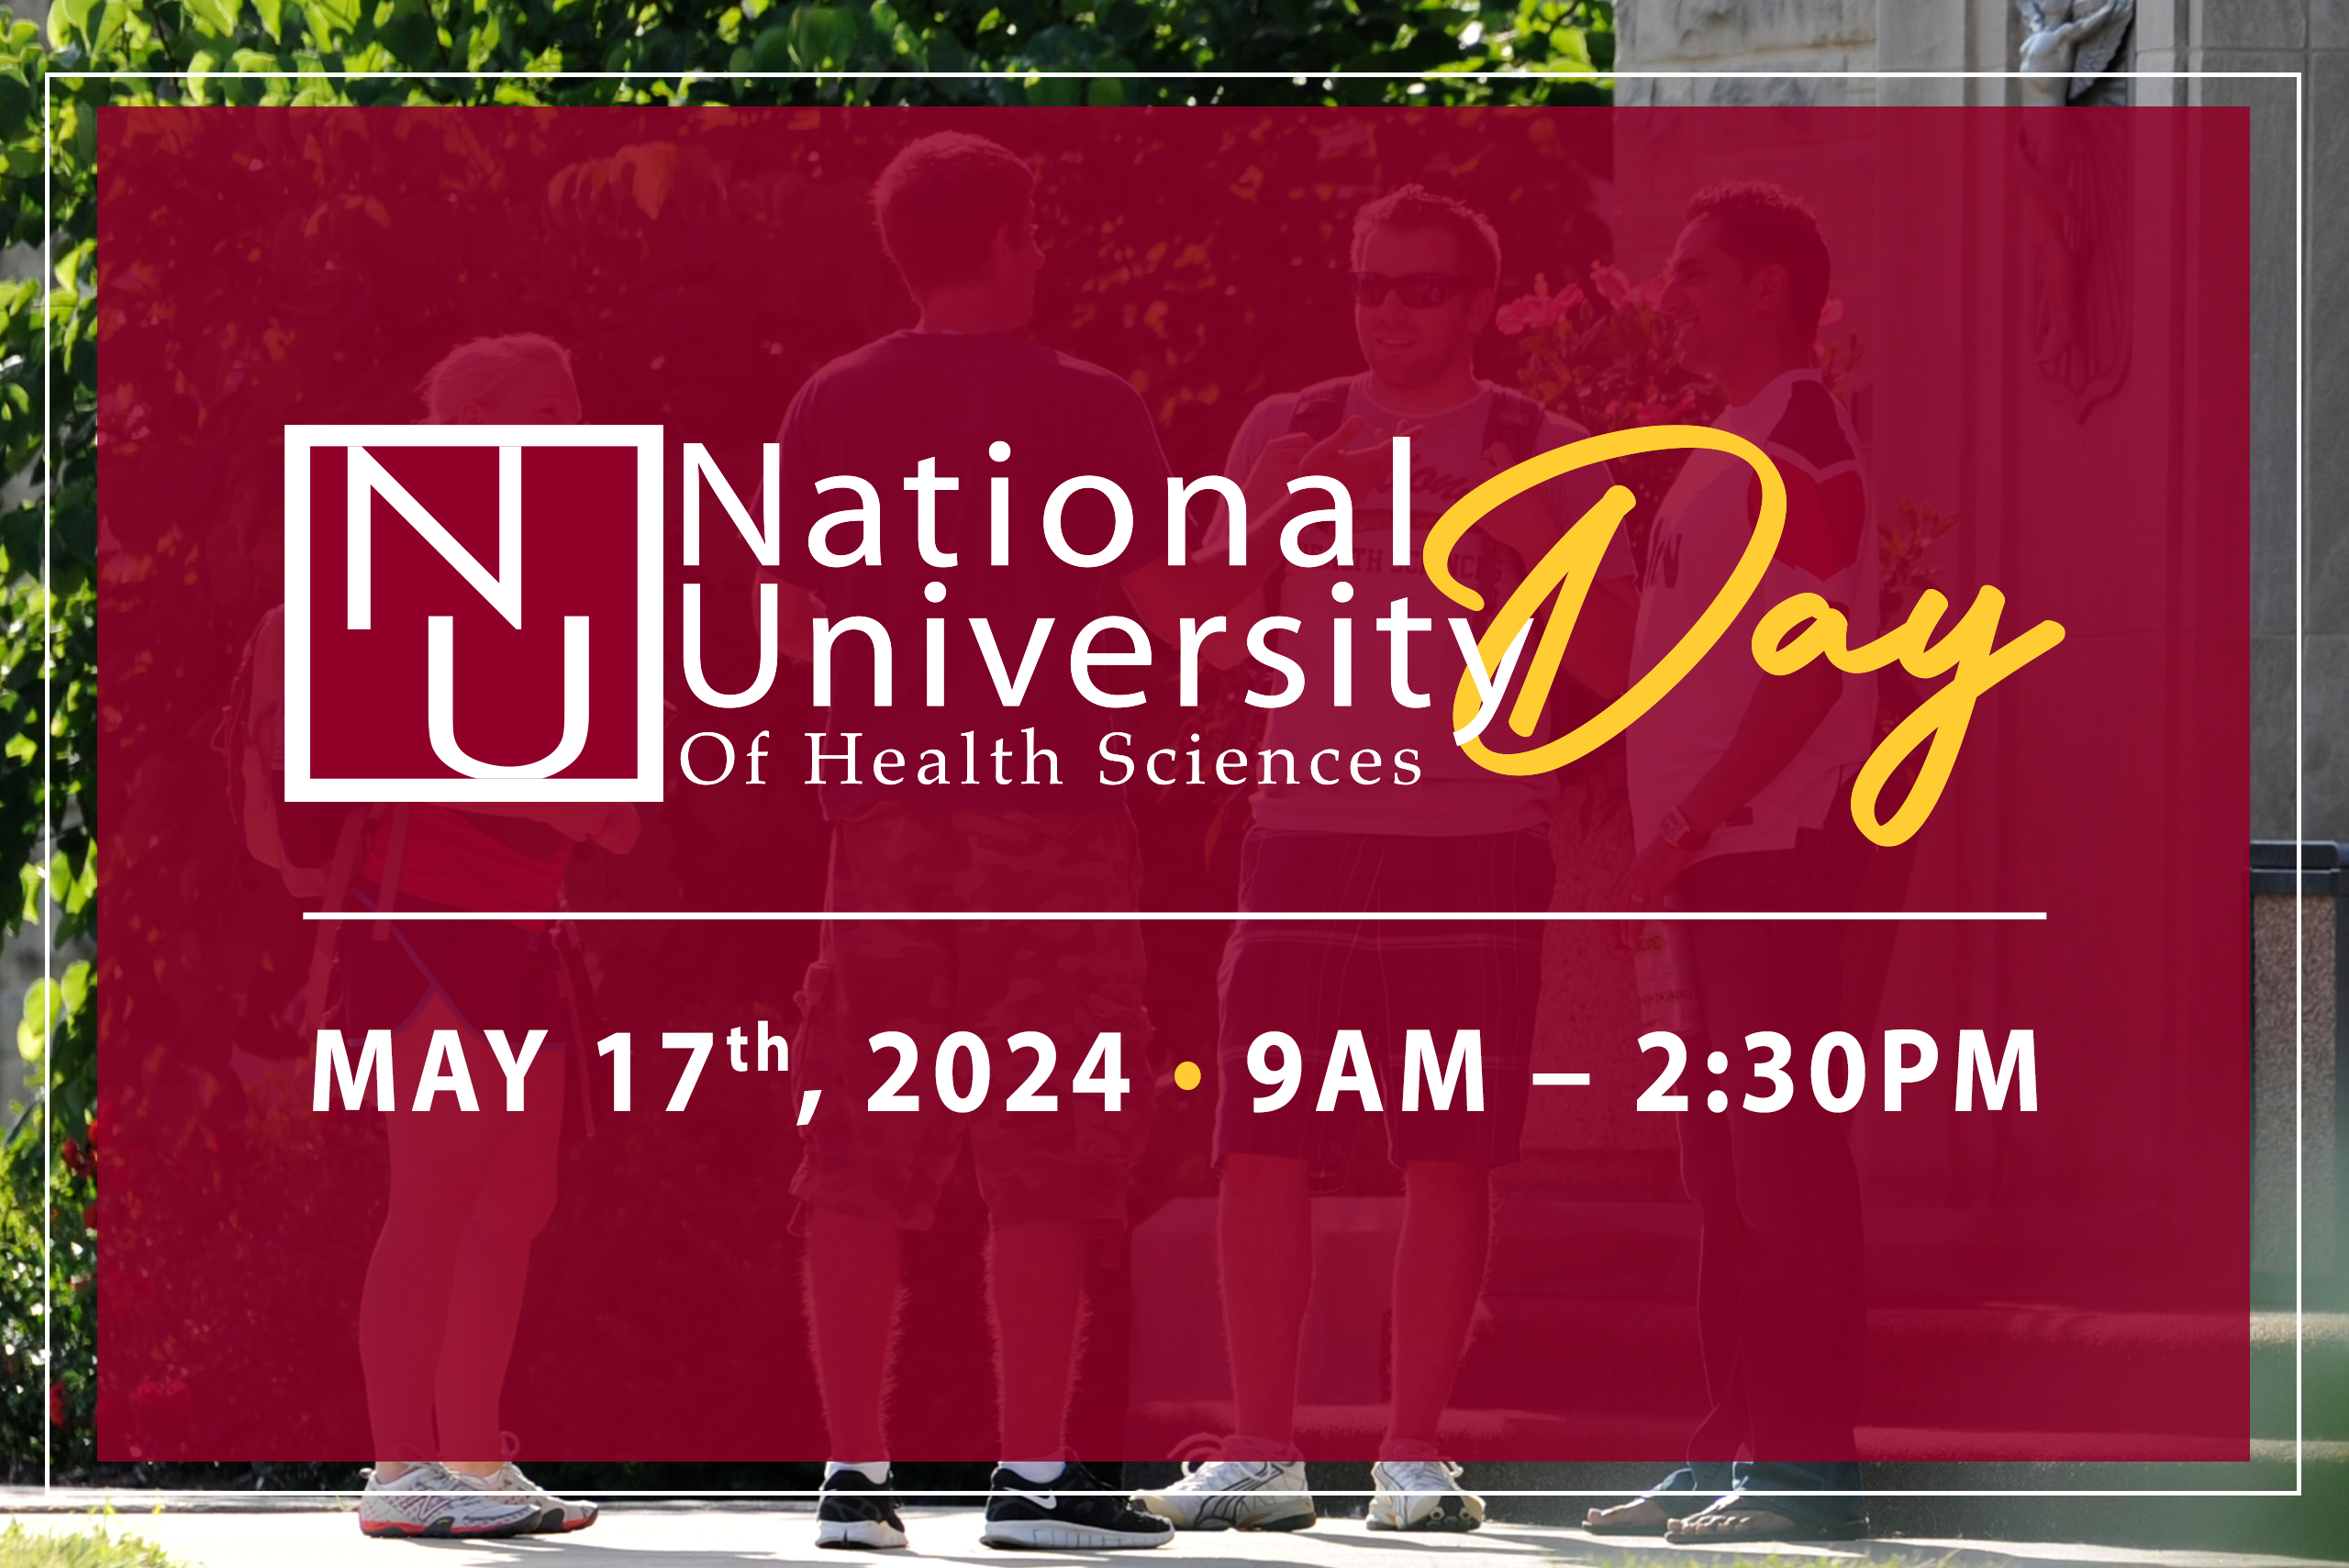 NUHS Day May 17th